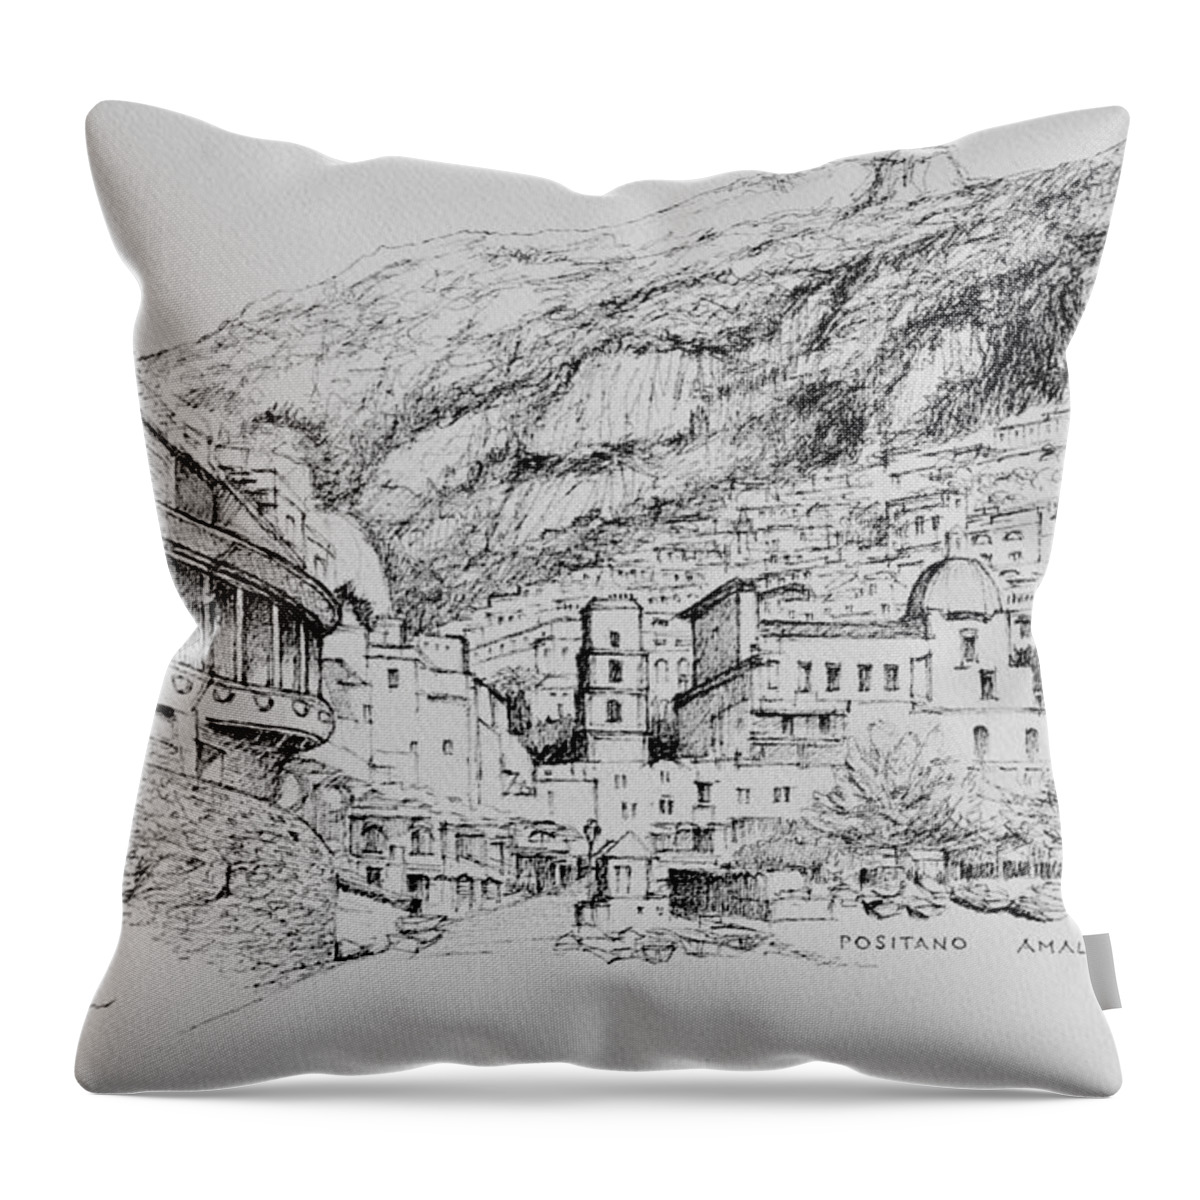 Italy Throw Pillow featuring the drawing Positano on the Amalfi Coast of Italy by Dai Wynn